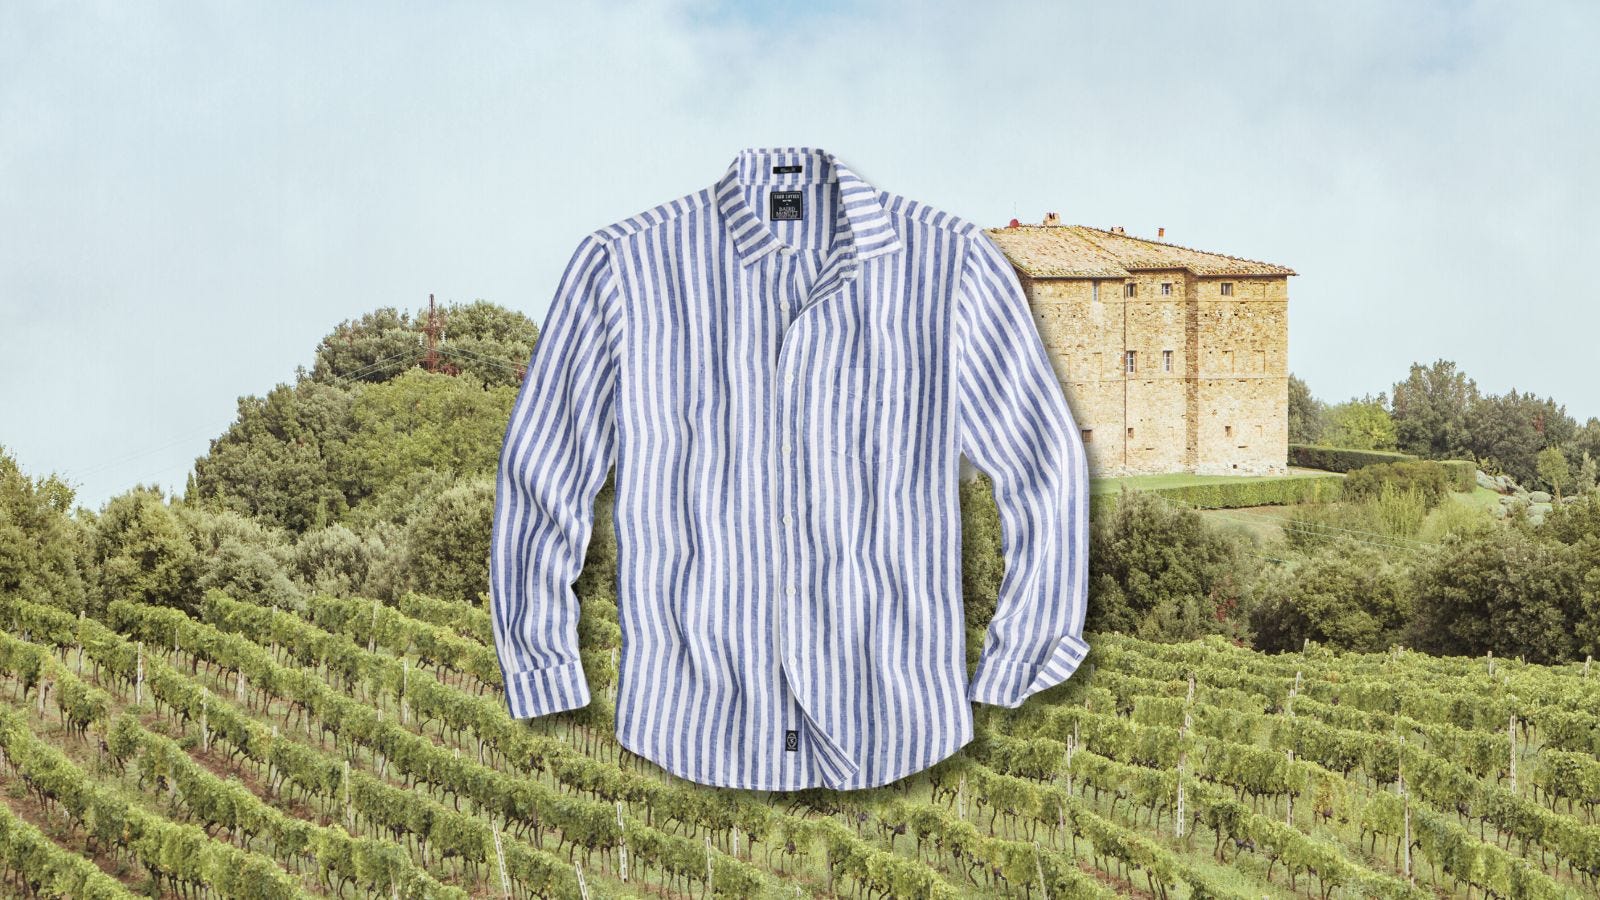 feature image on a blog post for stylish men's linen shirt outfits. image is a flat lay of a striped linen shirt, set against an Italian countryside background